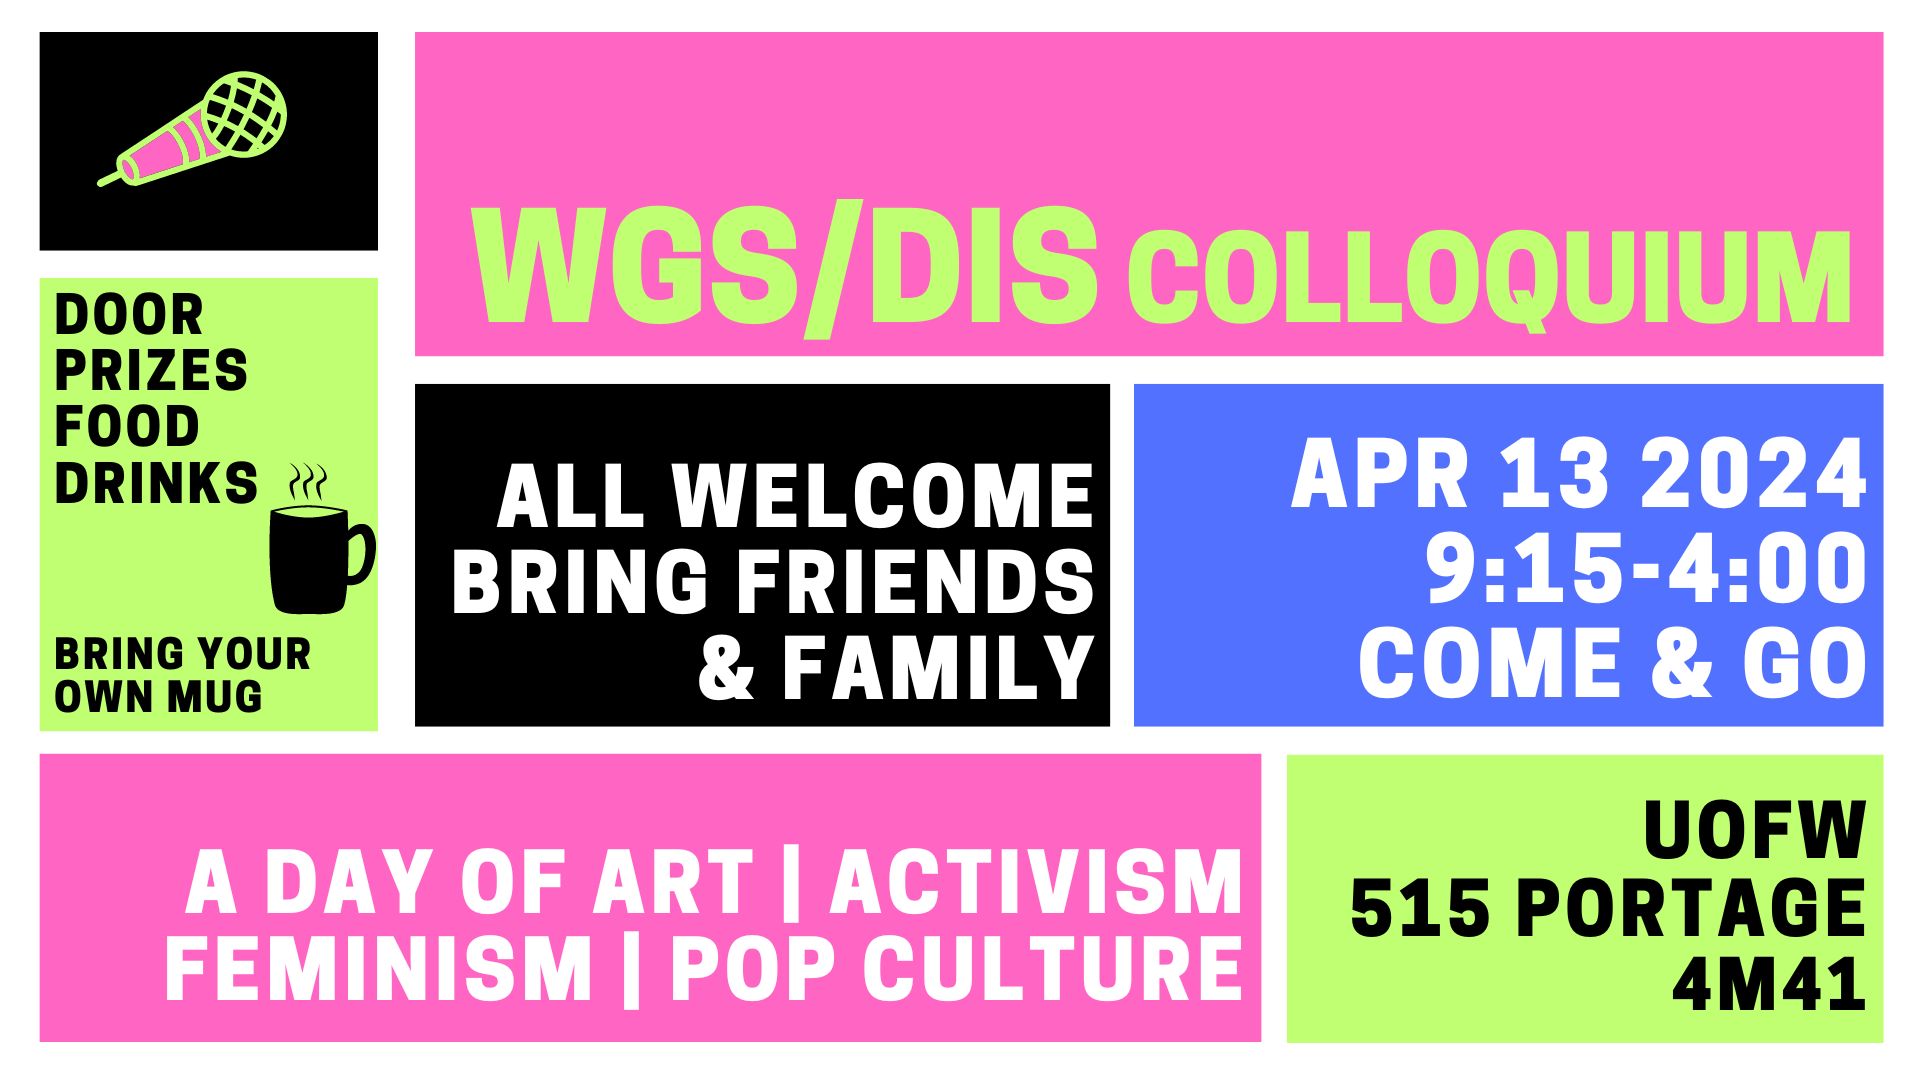 Colourblock design poster promoting WGS/DIS Colloquium: Door prizes, food, drinks, bring your own mug; all welcome, bring friends & family; Apr 13 2024, 9:15-4:00, come & go; A day of art | activism | feminism | pop culture; UofW 515 Portage 4M41